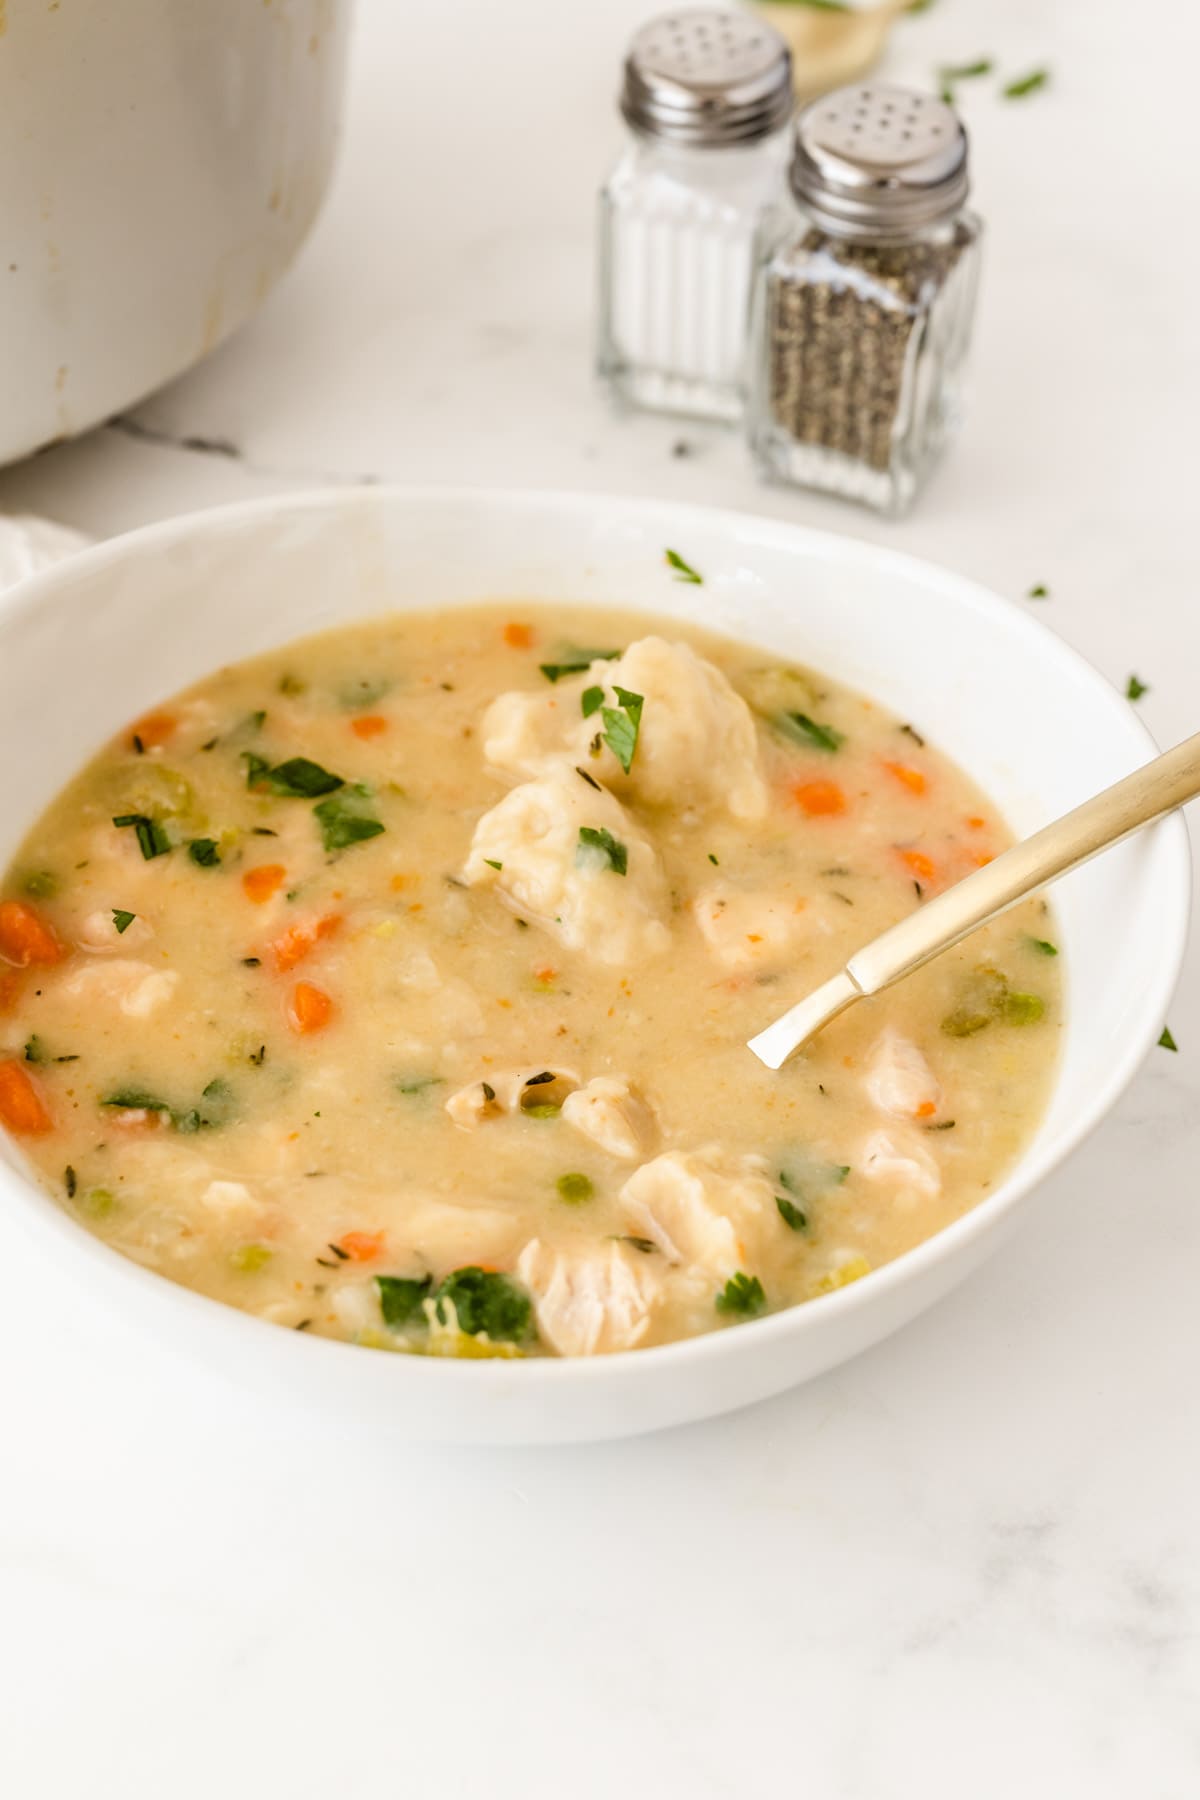 Bowl of chicken and dumpling soup